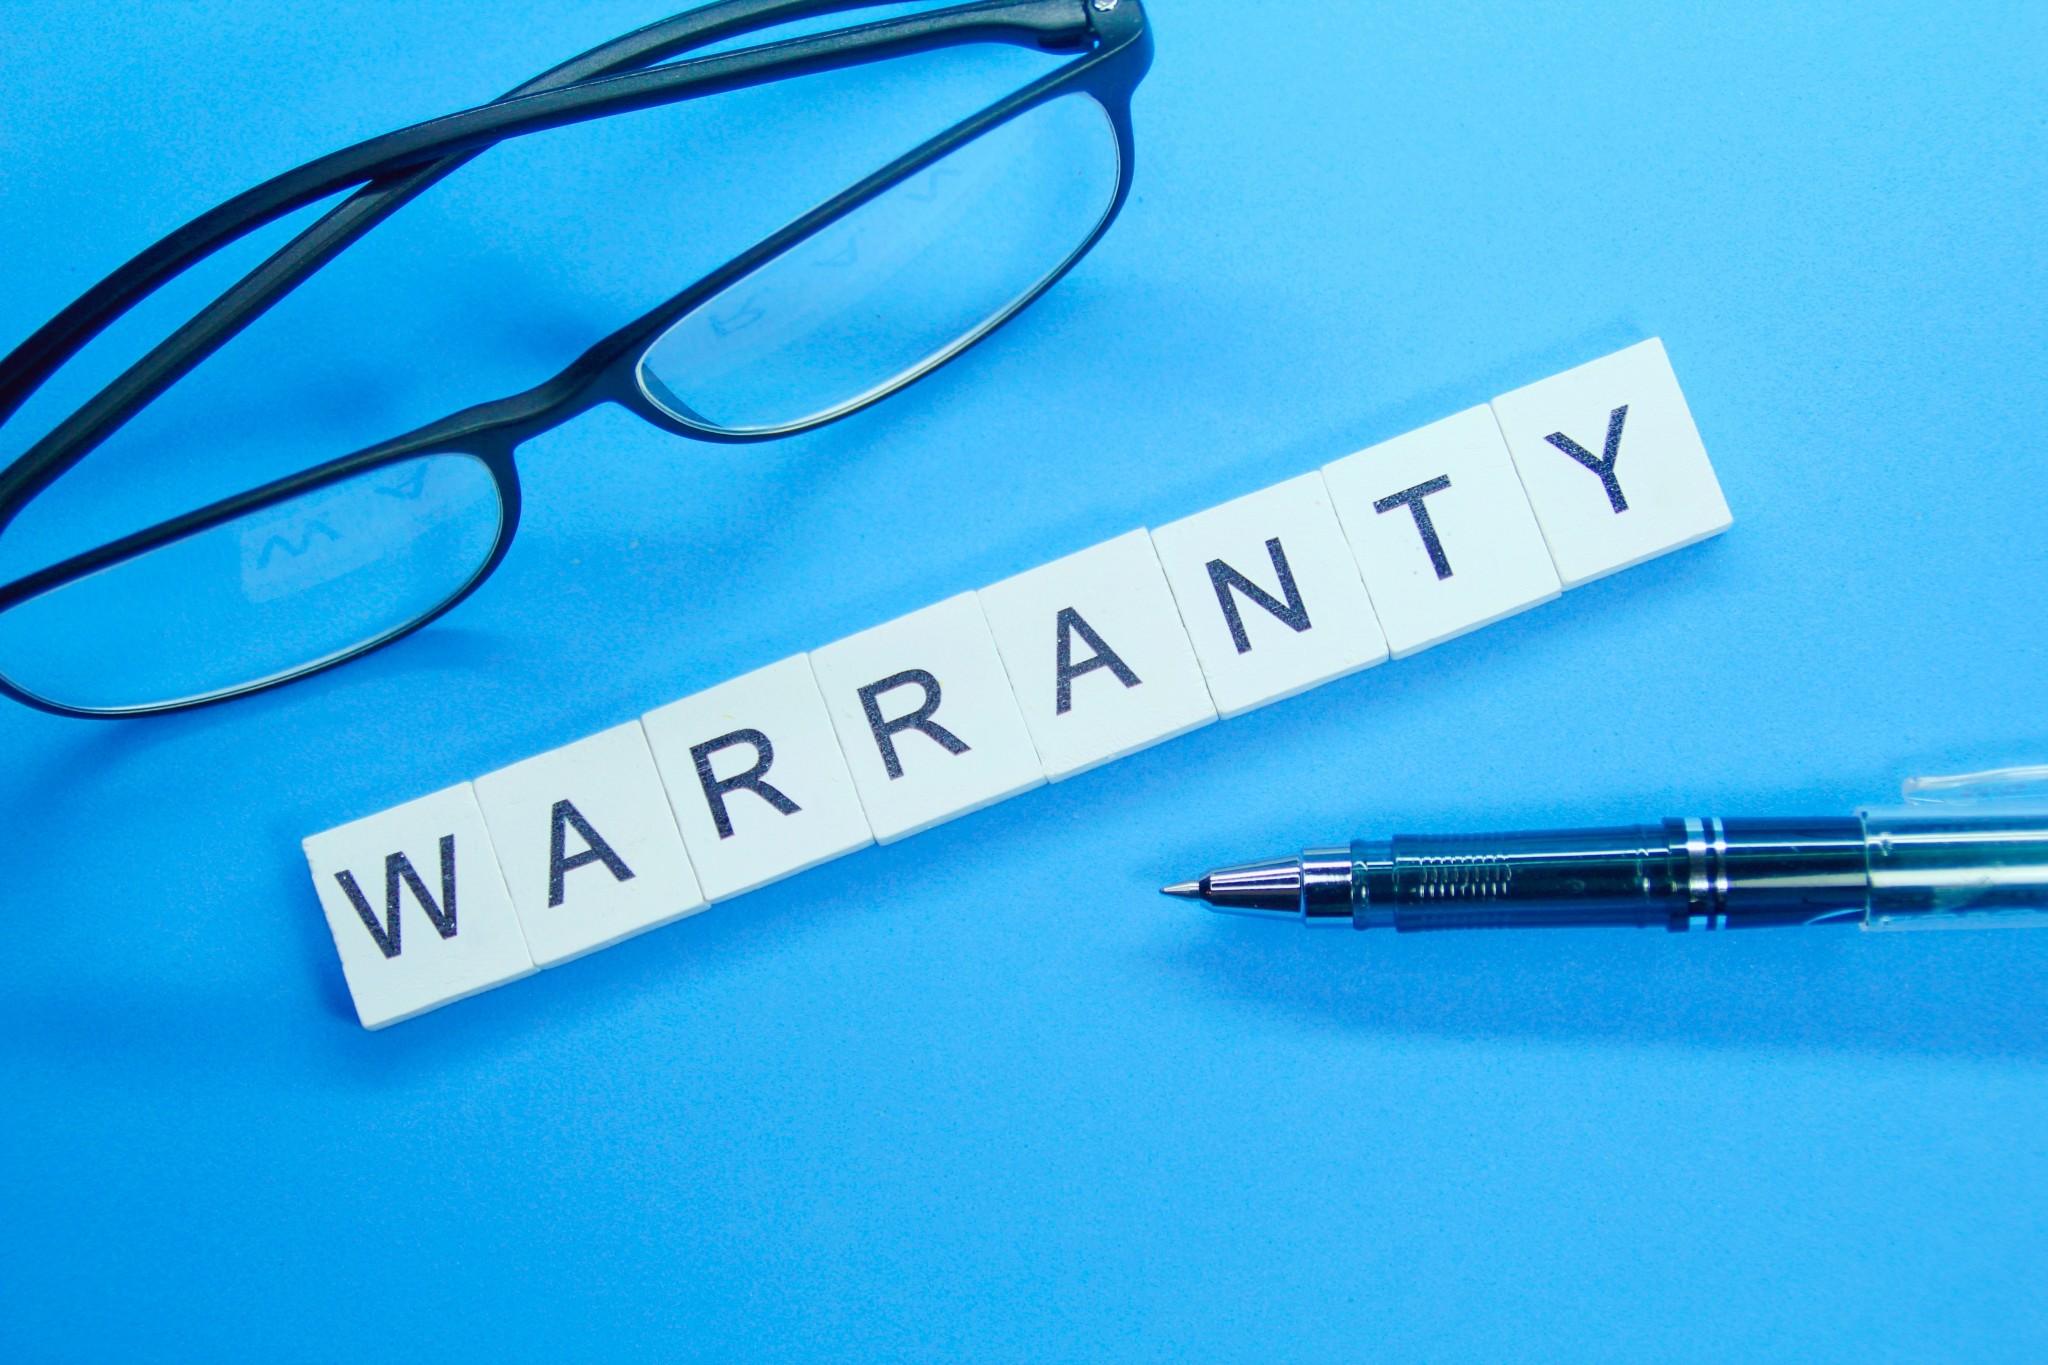 Knowing the details of what voids your car’s warranty is very important.